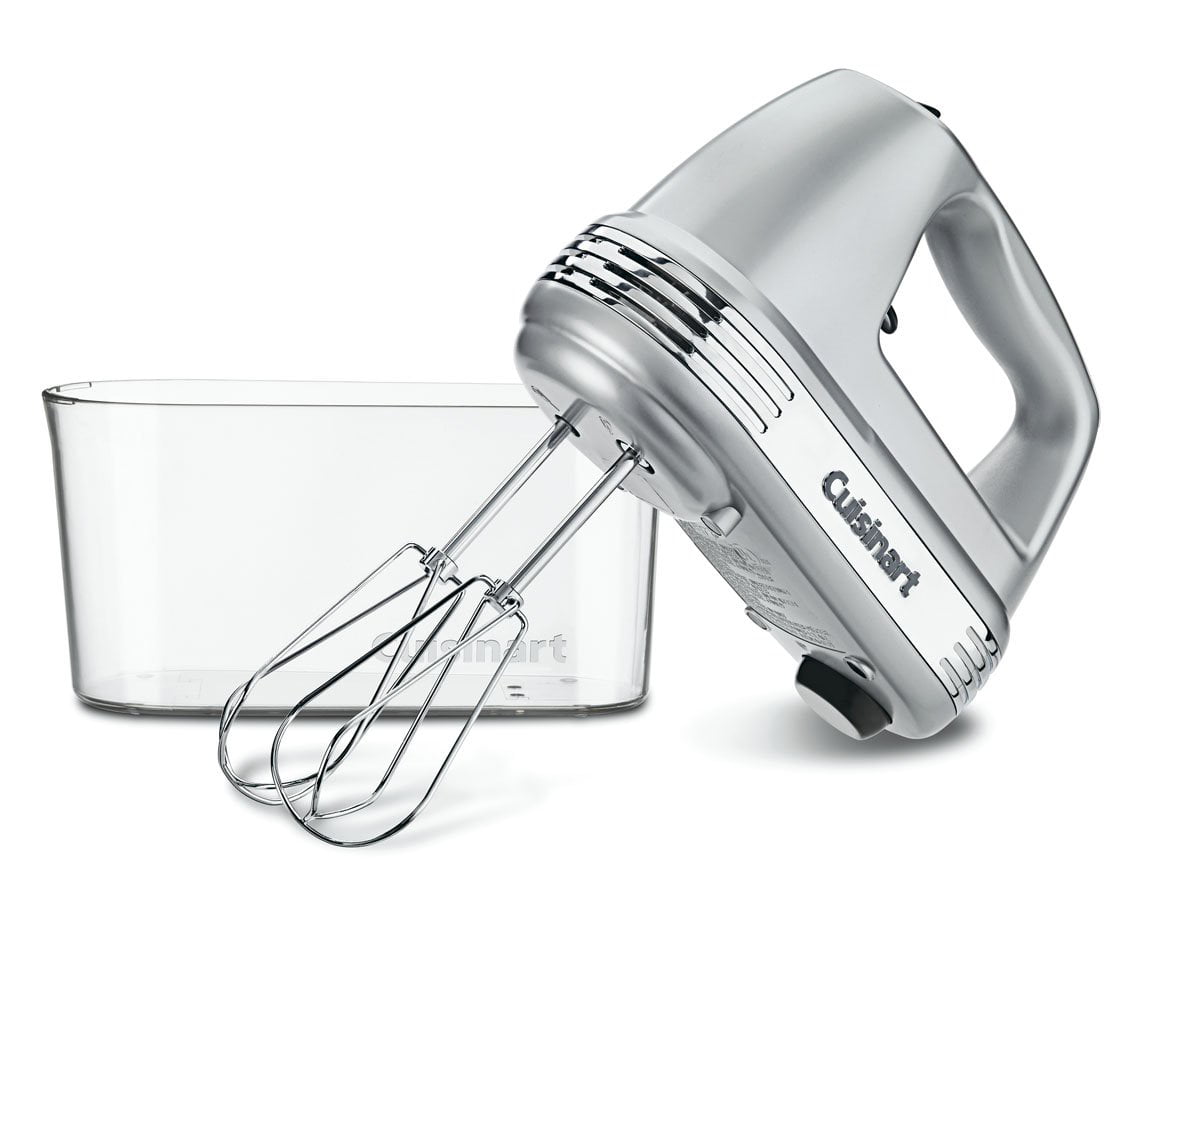 The Cuisinart Hand Mixer That's 'Full of Power' Is on Sale for $80